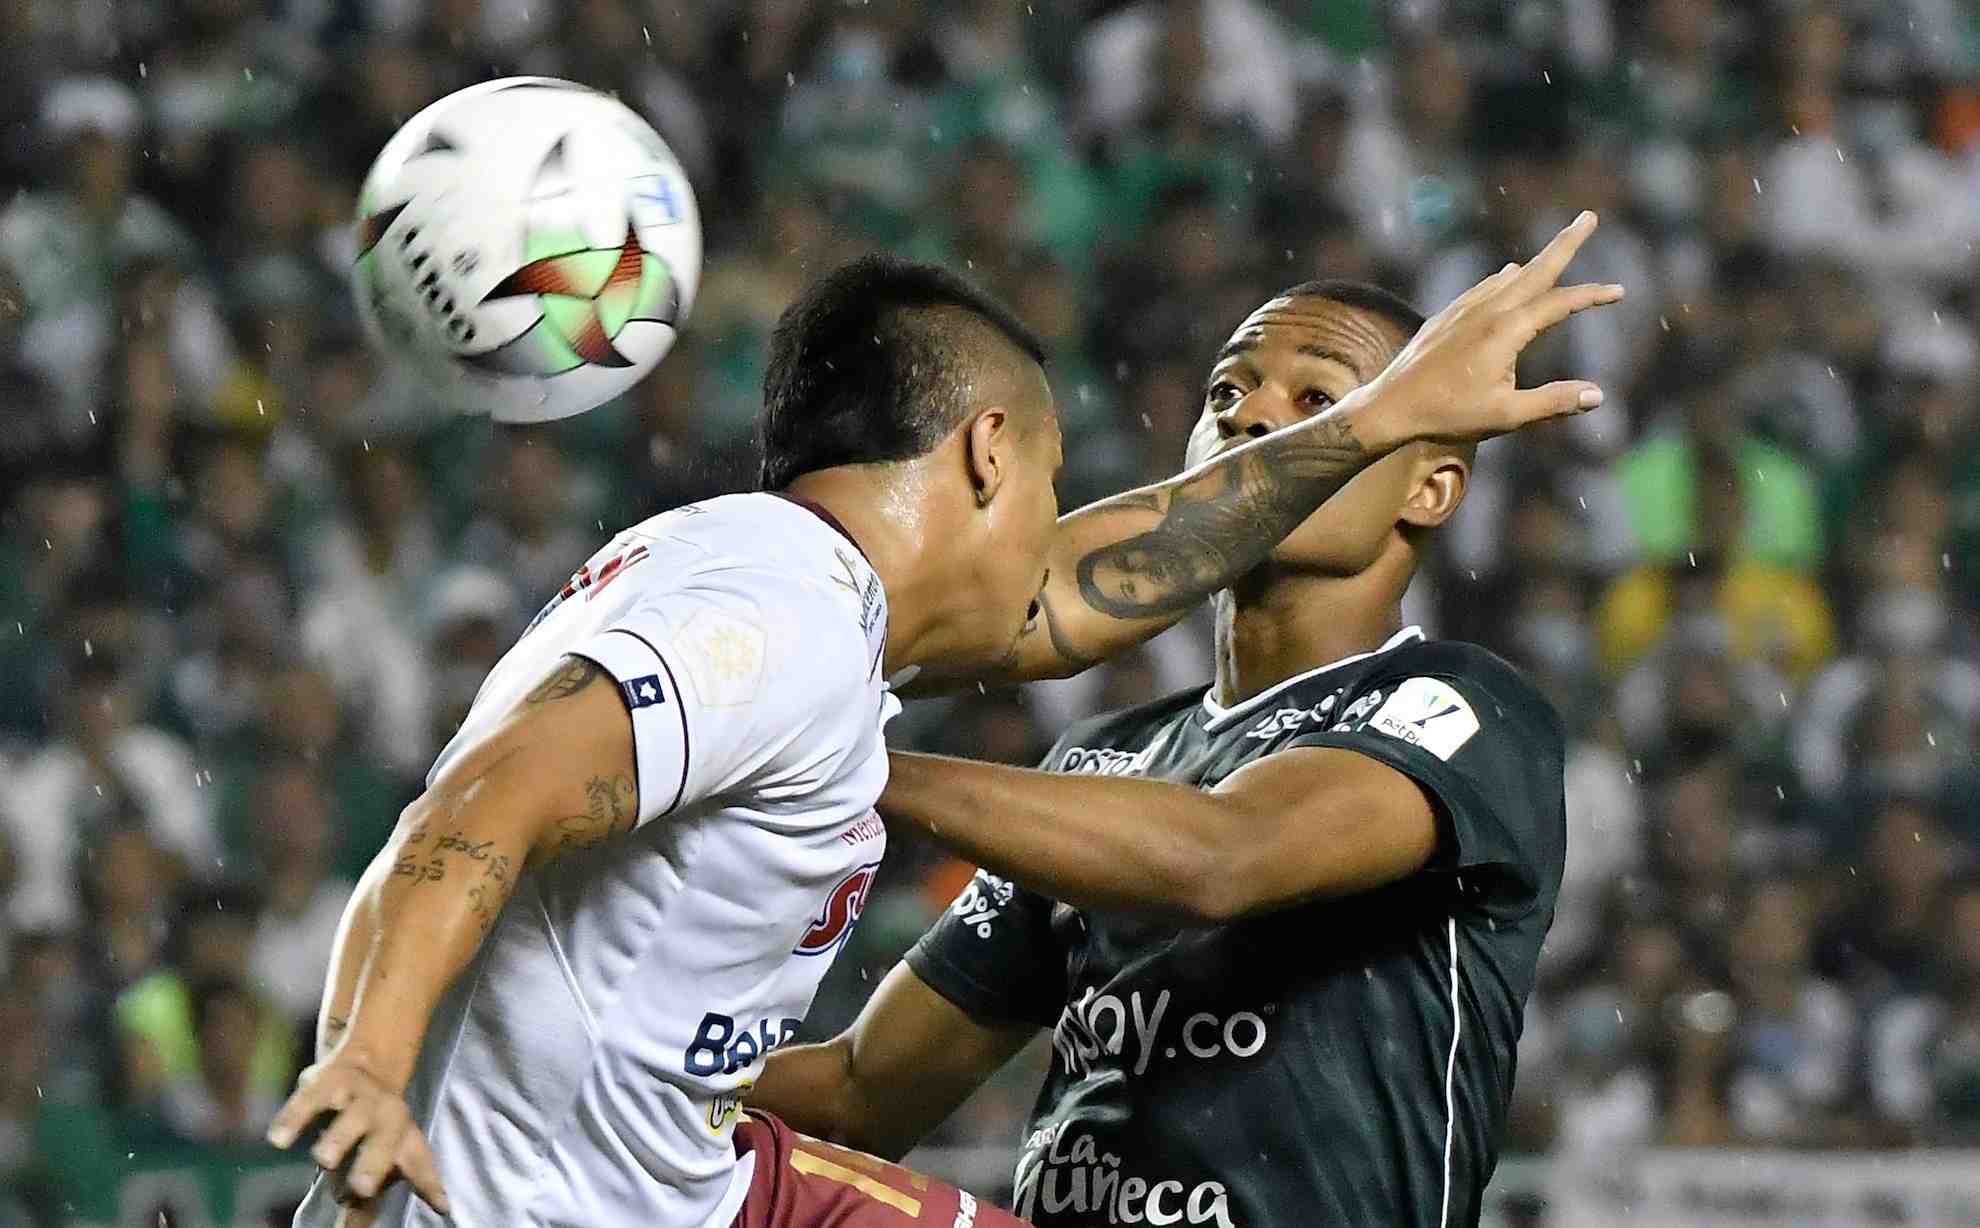 Cali loses home advantage and draws against Tolima in Palmaseca